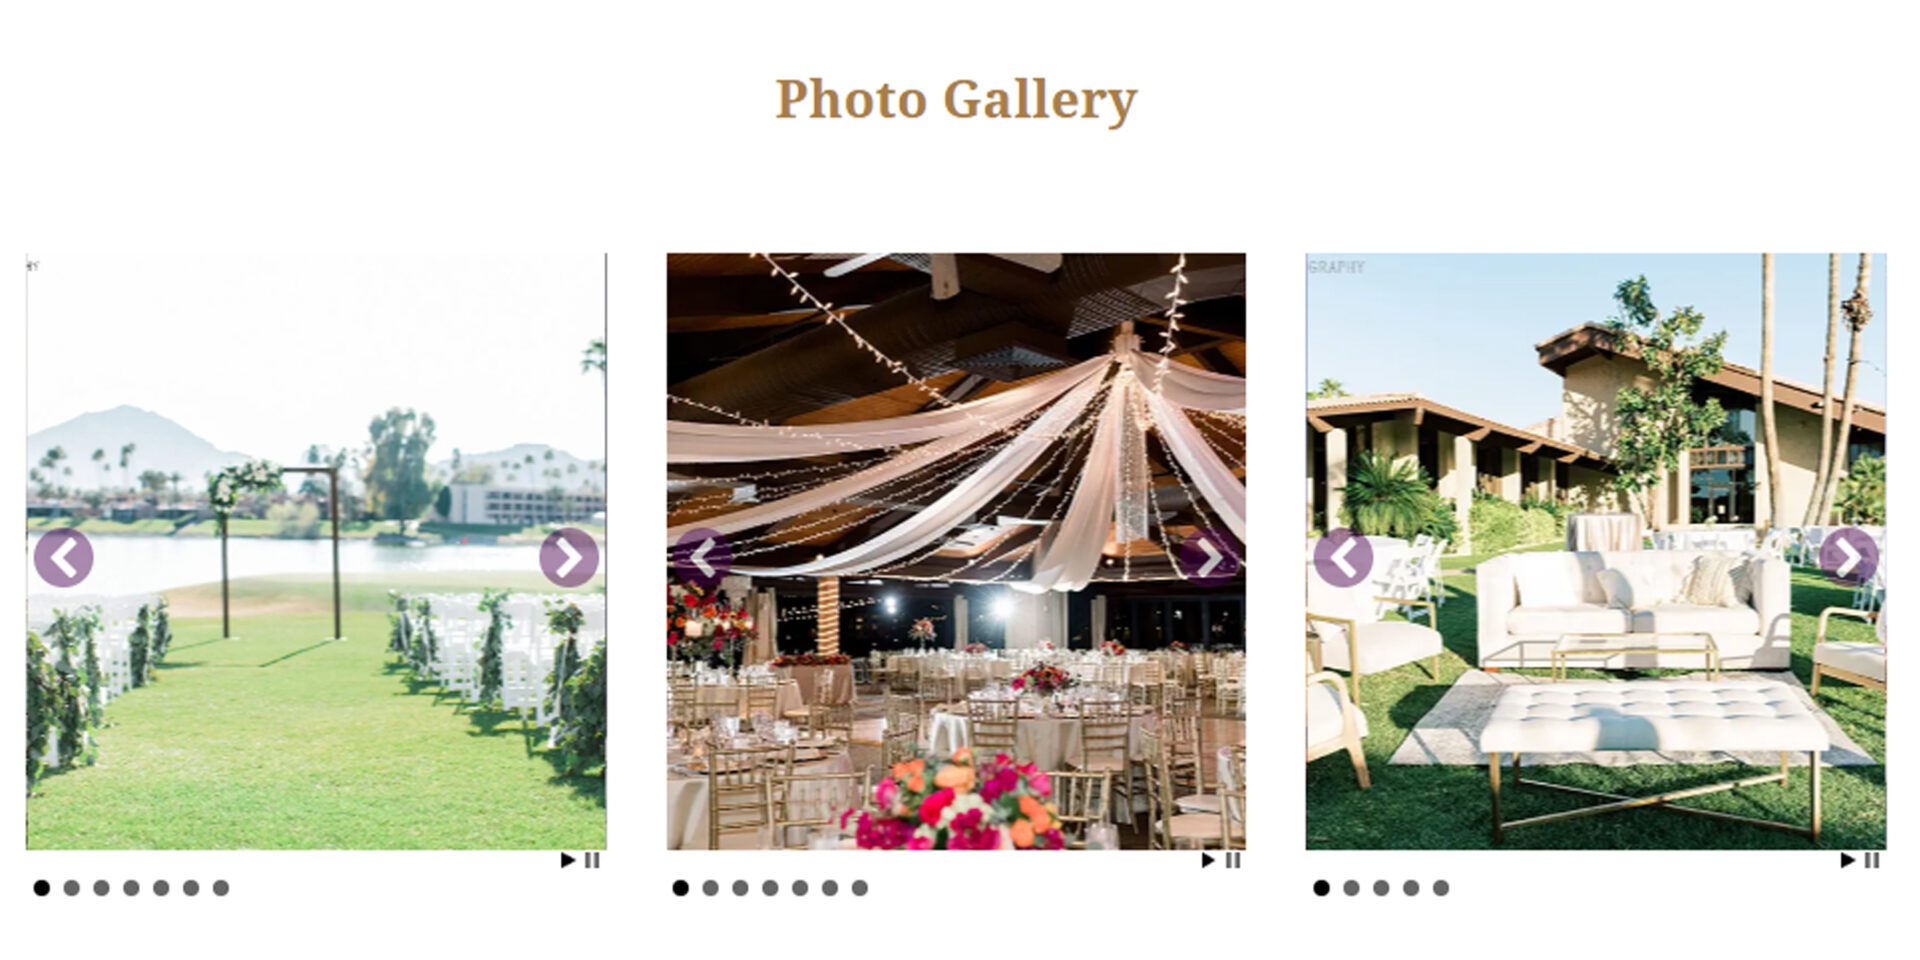 A photo gallery of some different types of wedding decor.